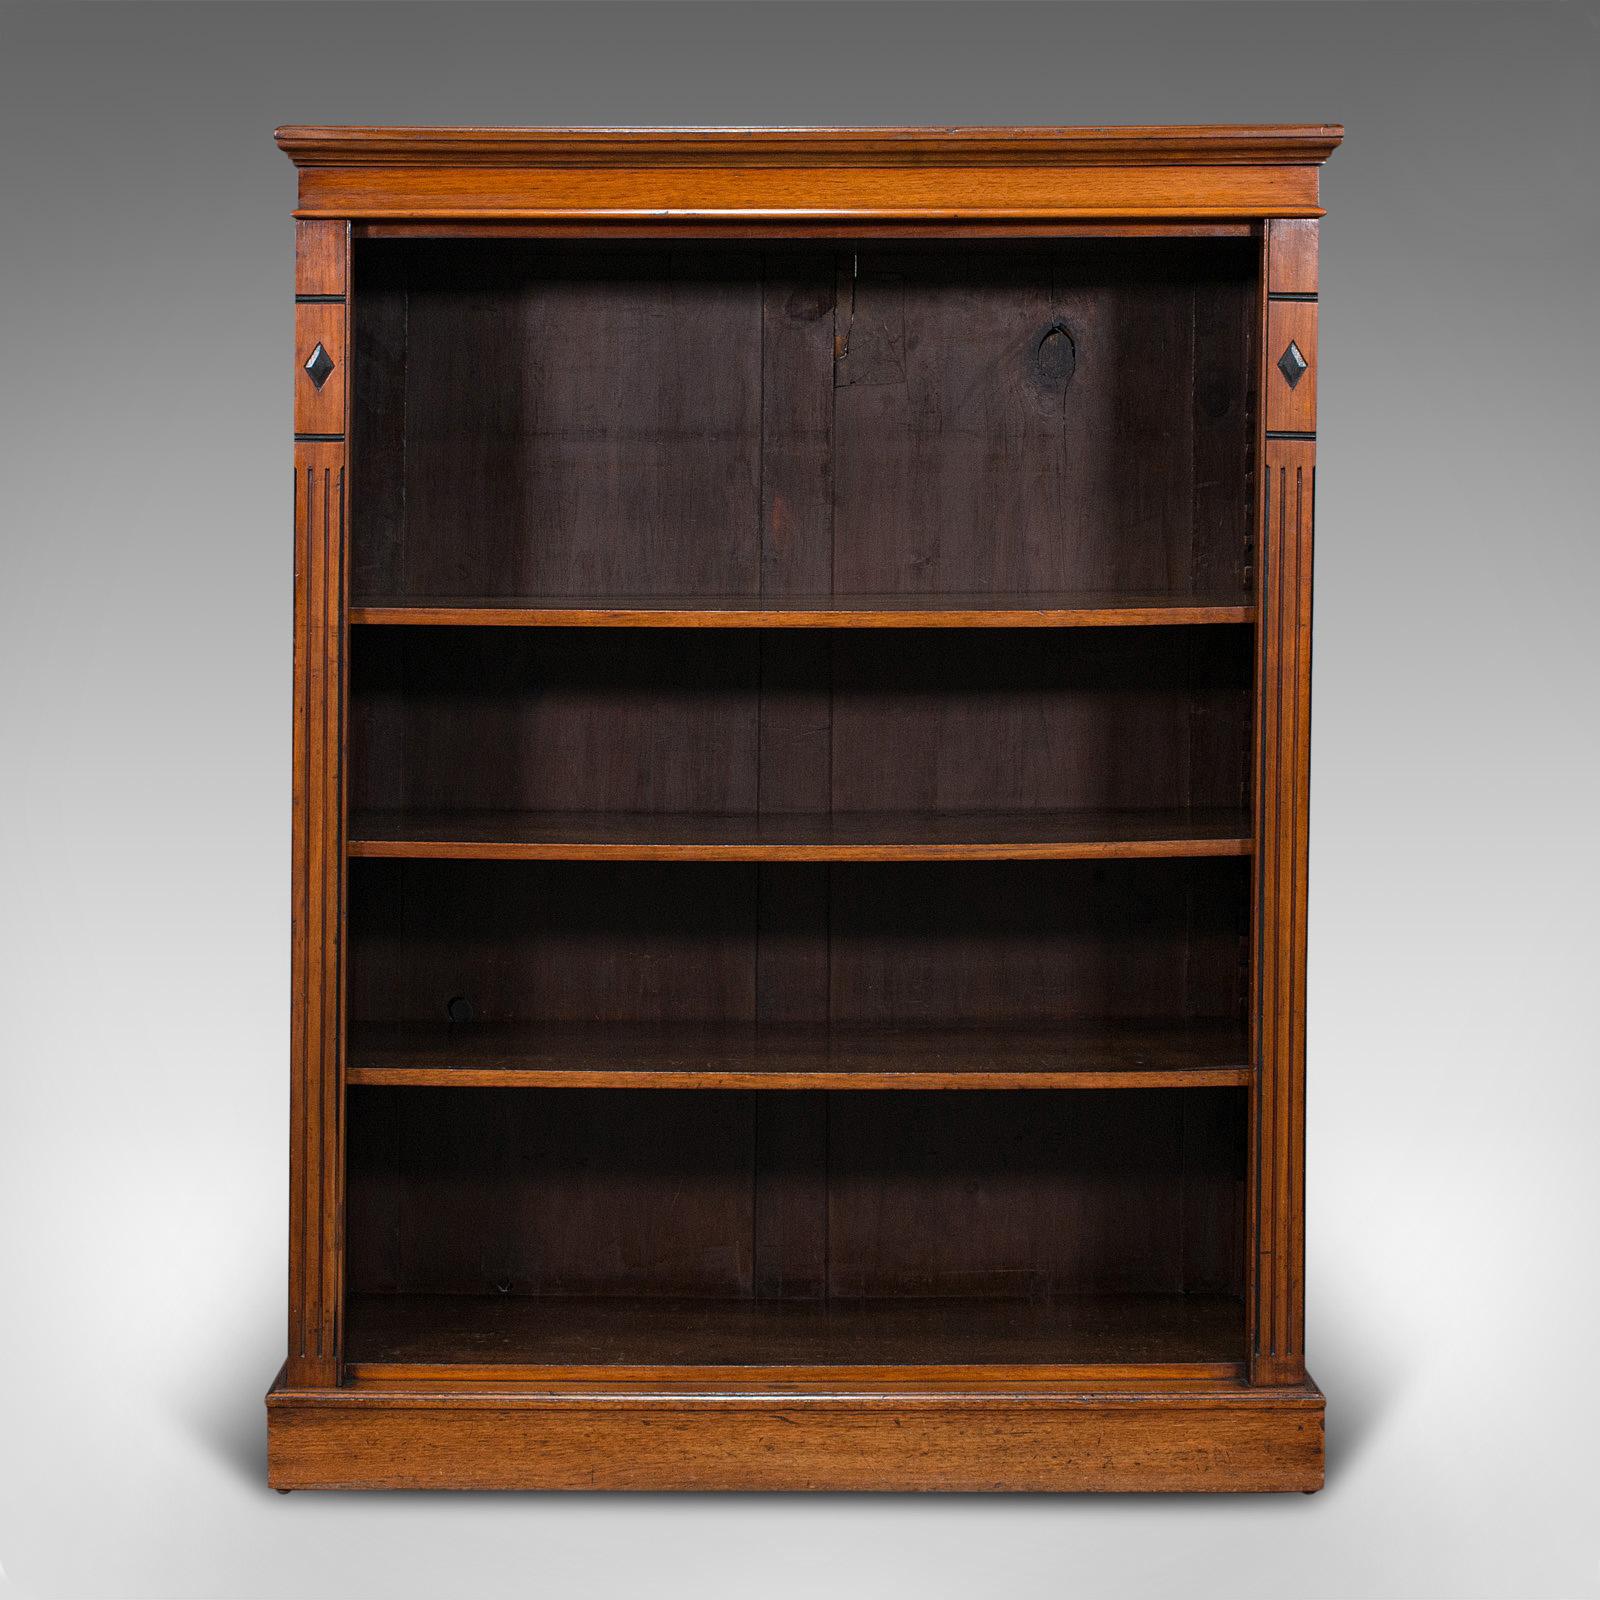 This is an antique set of bookshelves. An English, walnut open bookcase with adjustable shelves, dating to the Victorian period, circa 1880.

Attractive bookshelf with fascinating Doric overtones
Displaying a desirable aged patina and in good